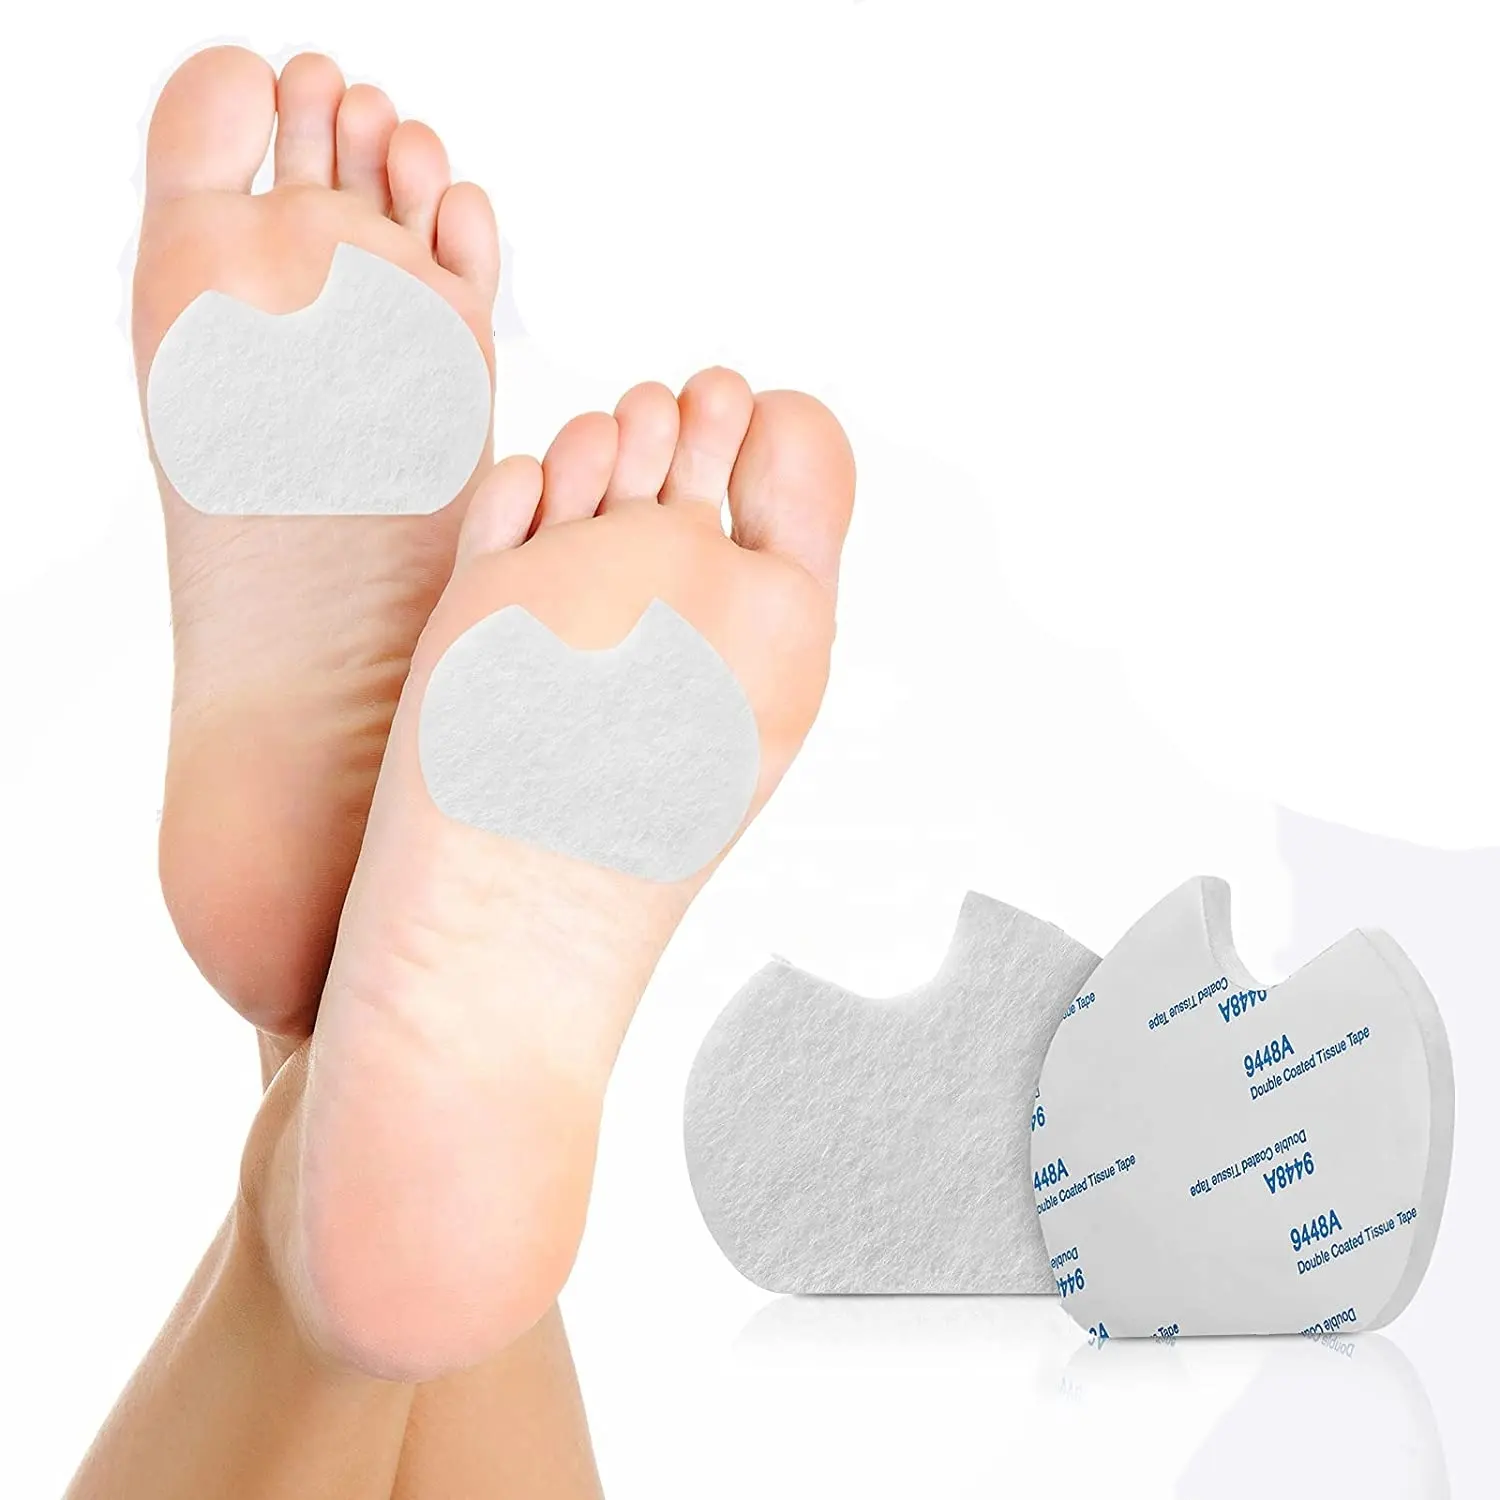 Self-adhesive White Soft Wool Felt Dancer Forefoot Sesamoid Foot Cushion Pads for Dancing Running Sports Pain Relief